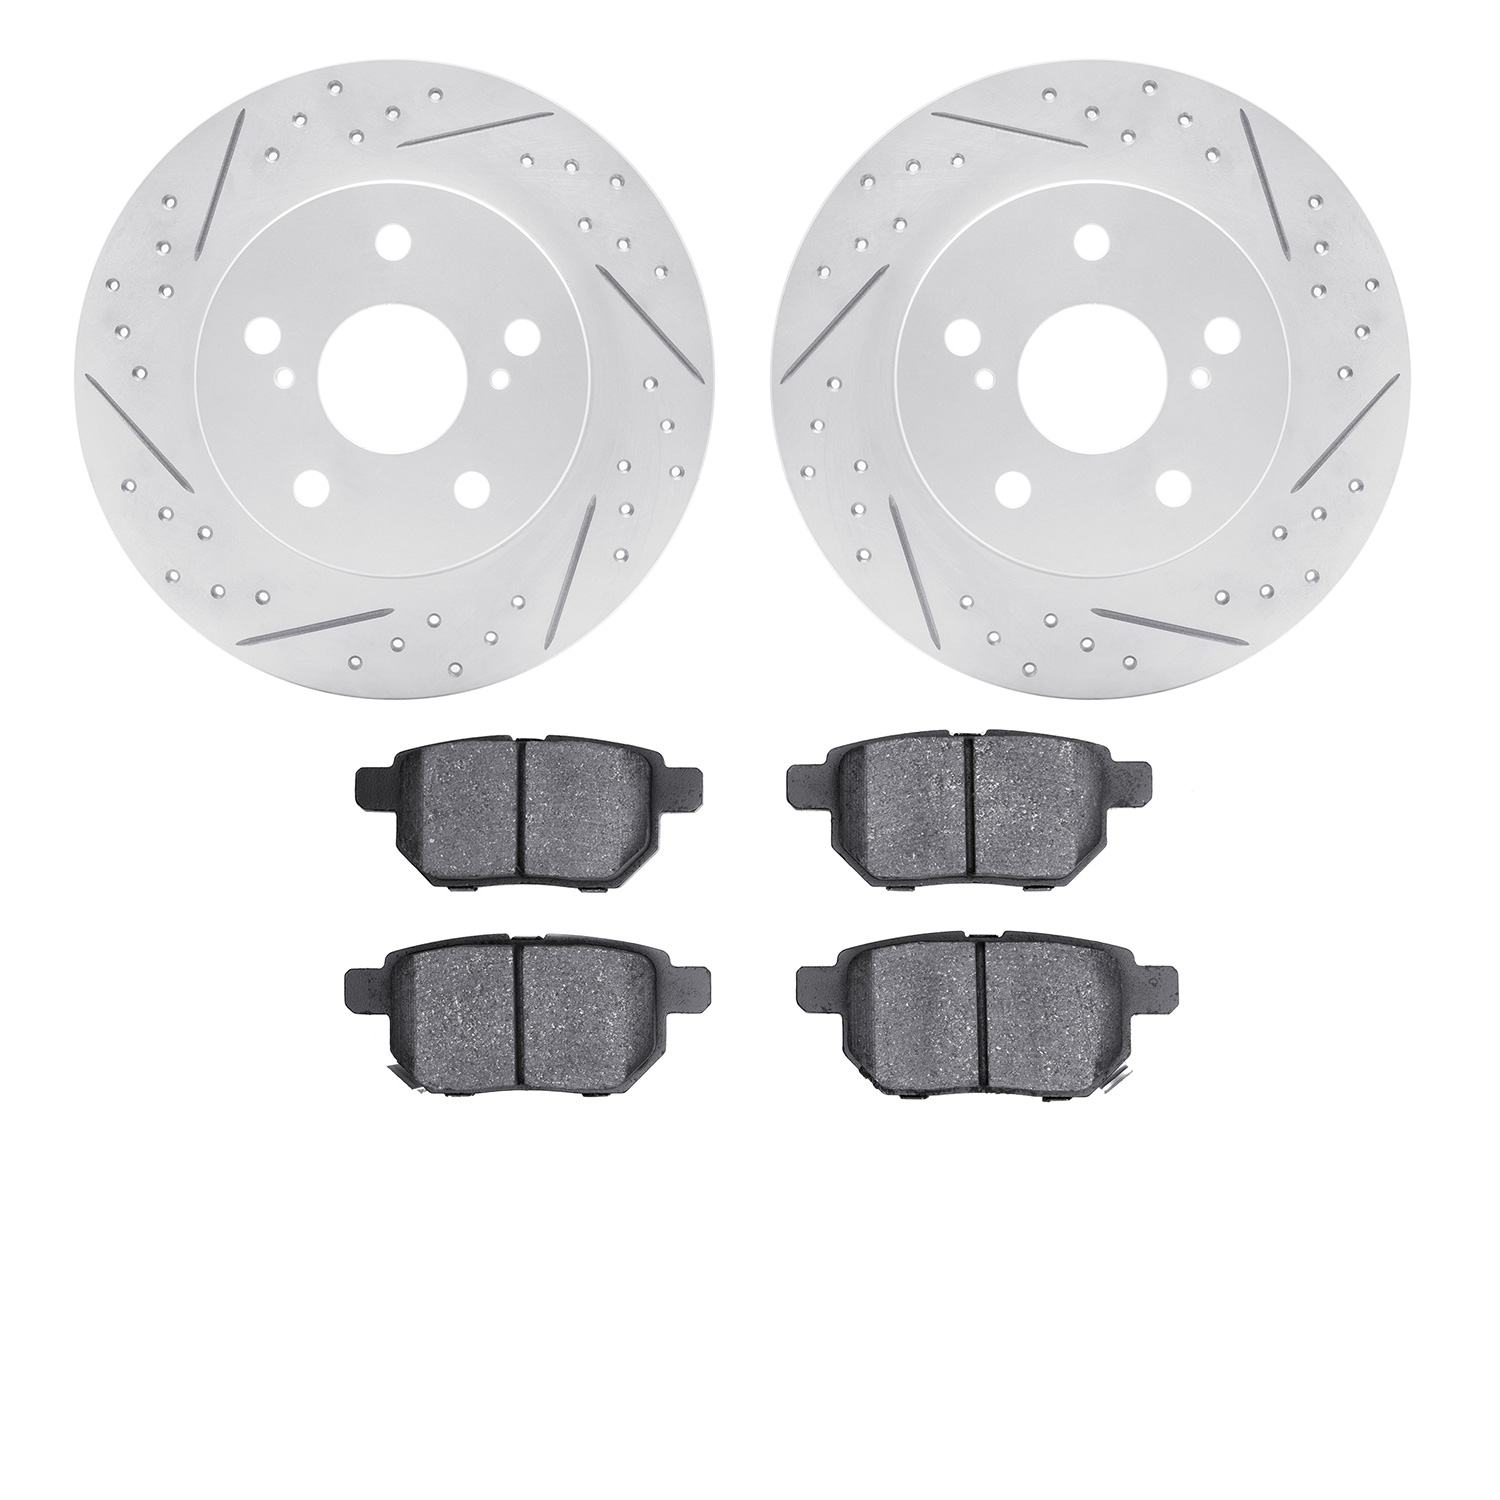 2502-91000 Geoperformance Drilled/Slotted Rotors w/5000 Advanced Brake Pads Kit, 2011-2016 Lexus/Toyota/Scion, Position: Rear